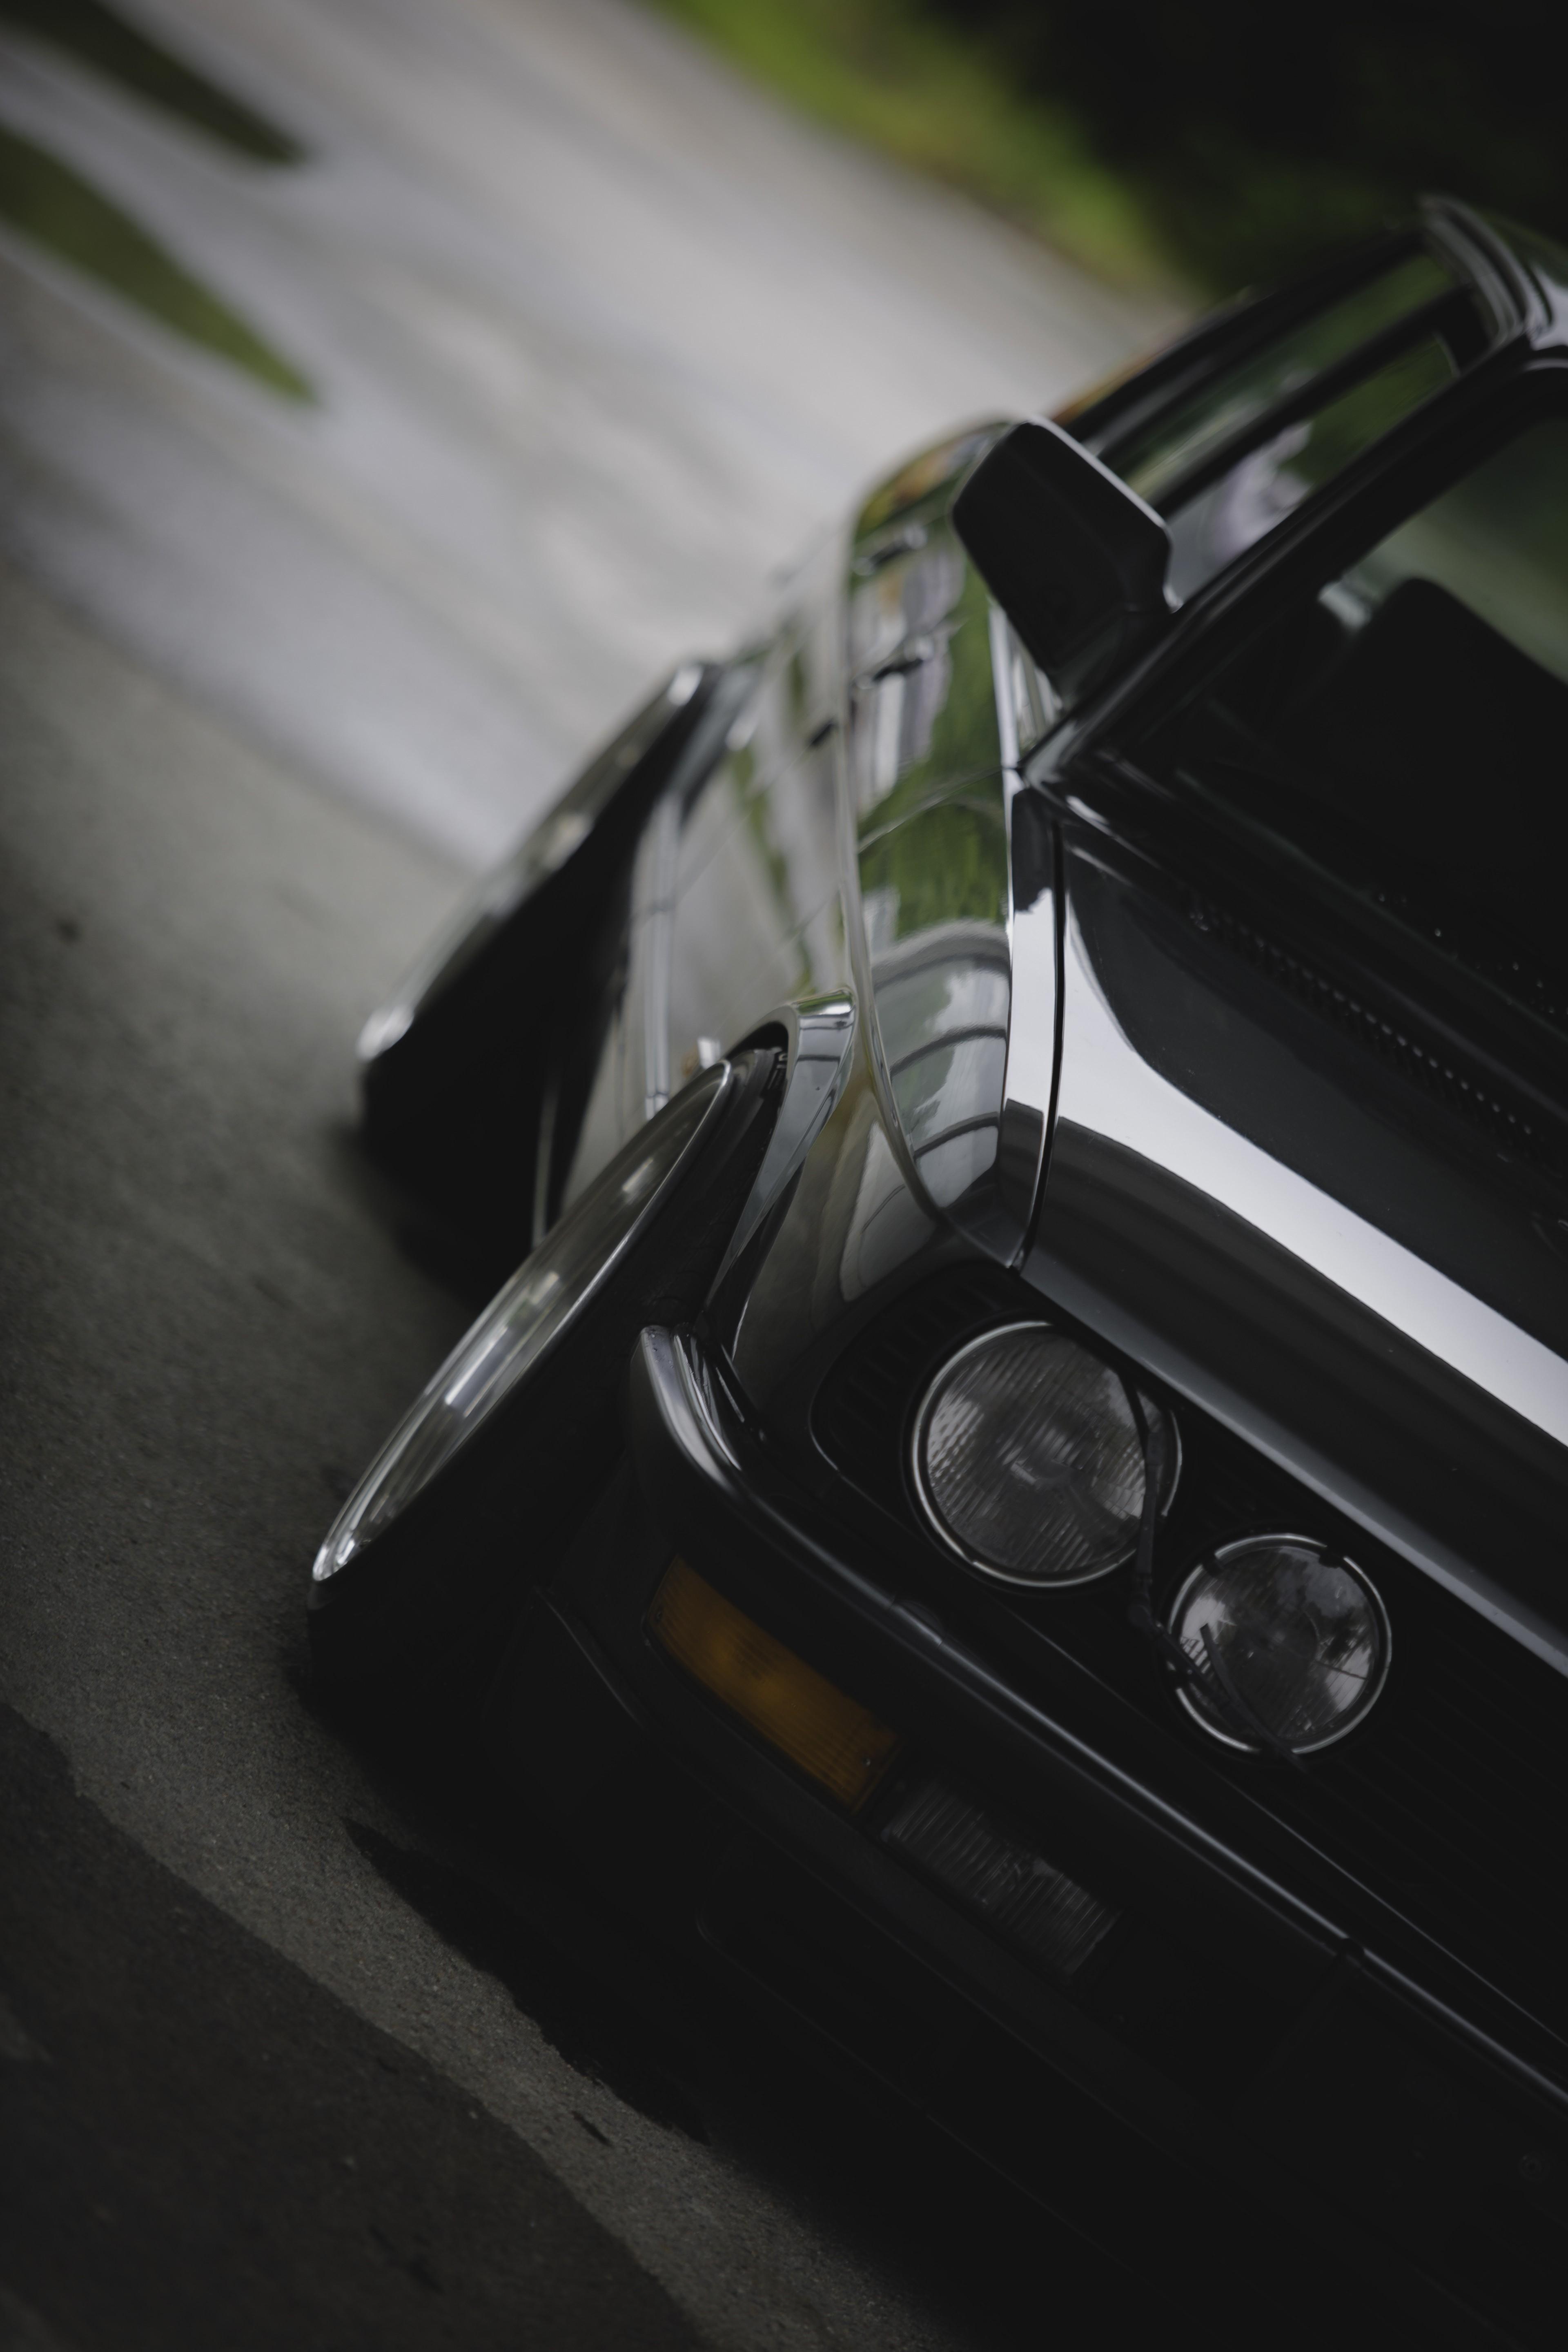 HD wallpaper, Bmw E28 Car German Cars Stance Static Stanceworks Low Fitment